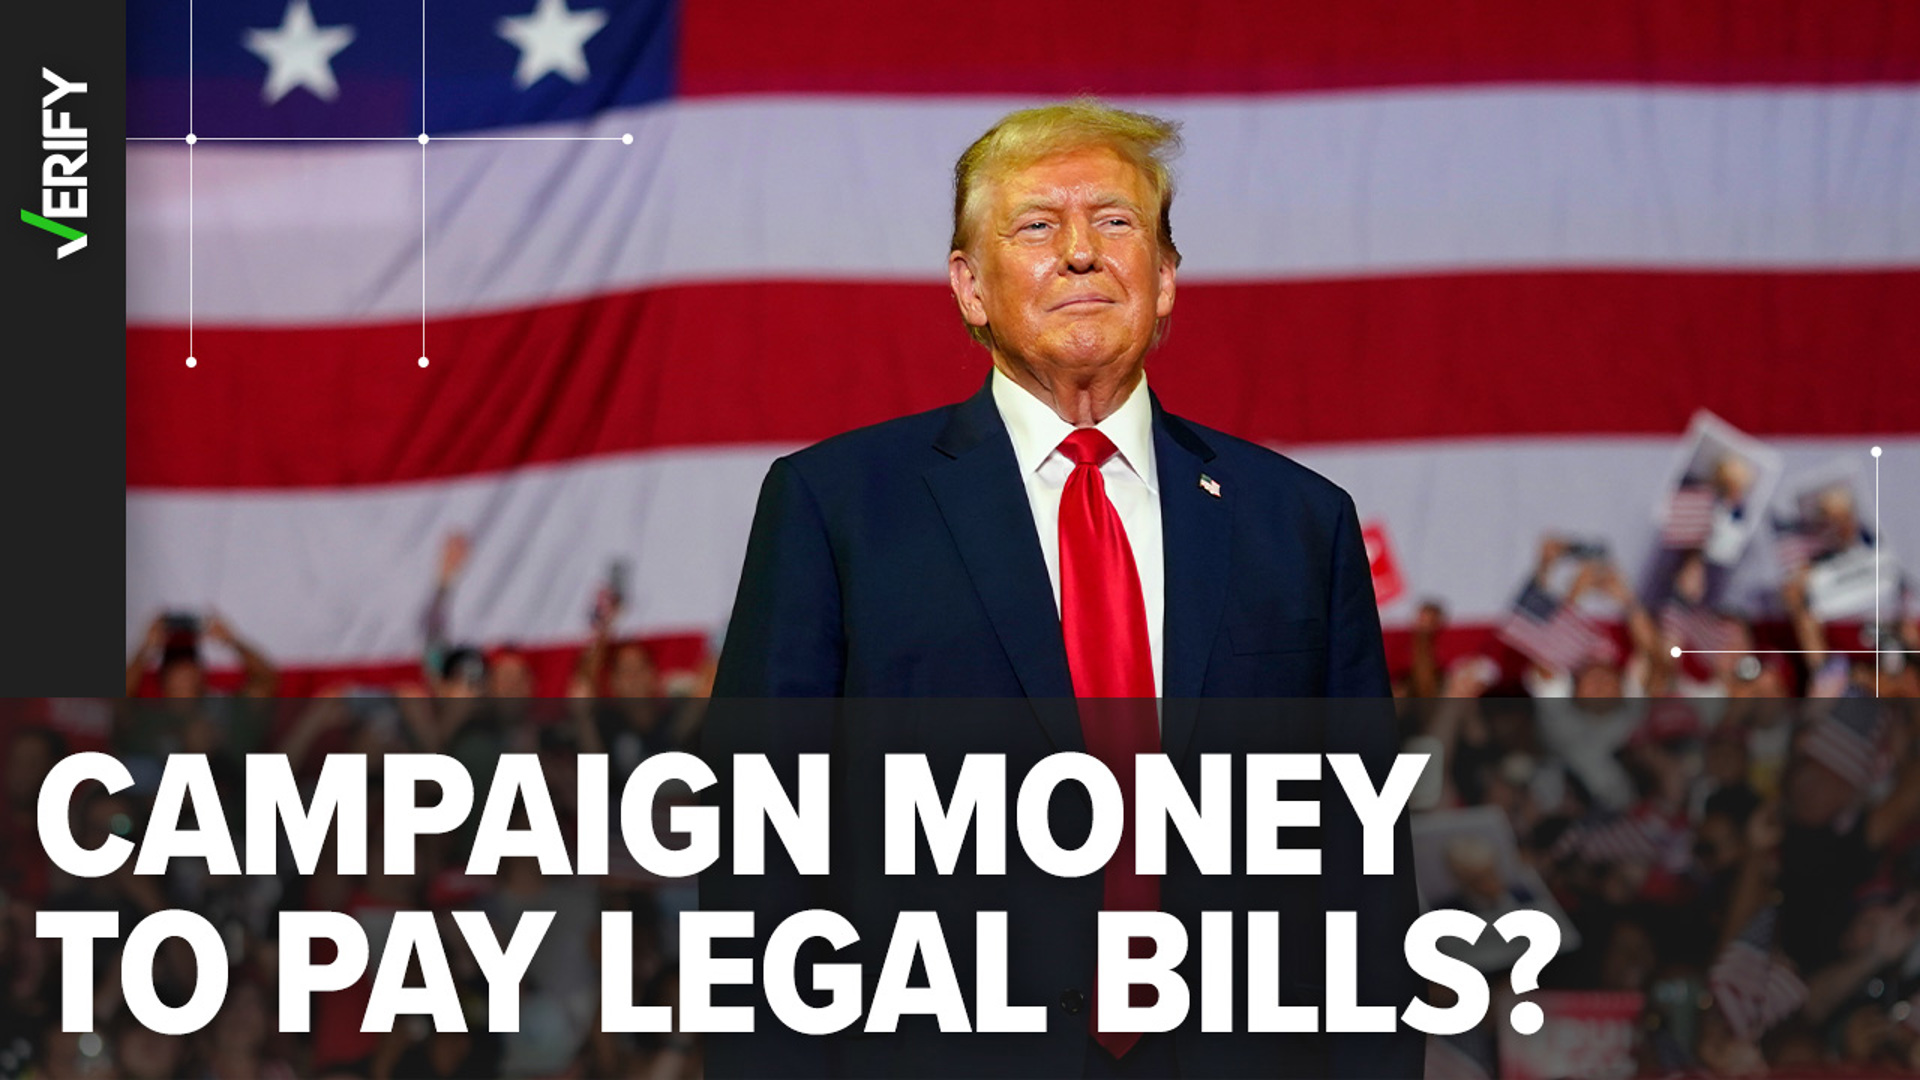 Many VERIFY readers have asked us if former President Trump is allowed to use campaign funds to pay his legal bills. Here's why the answer isn’t clear-cut.